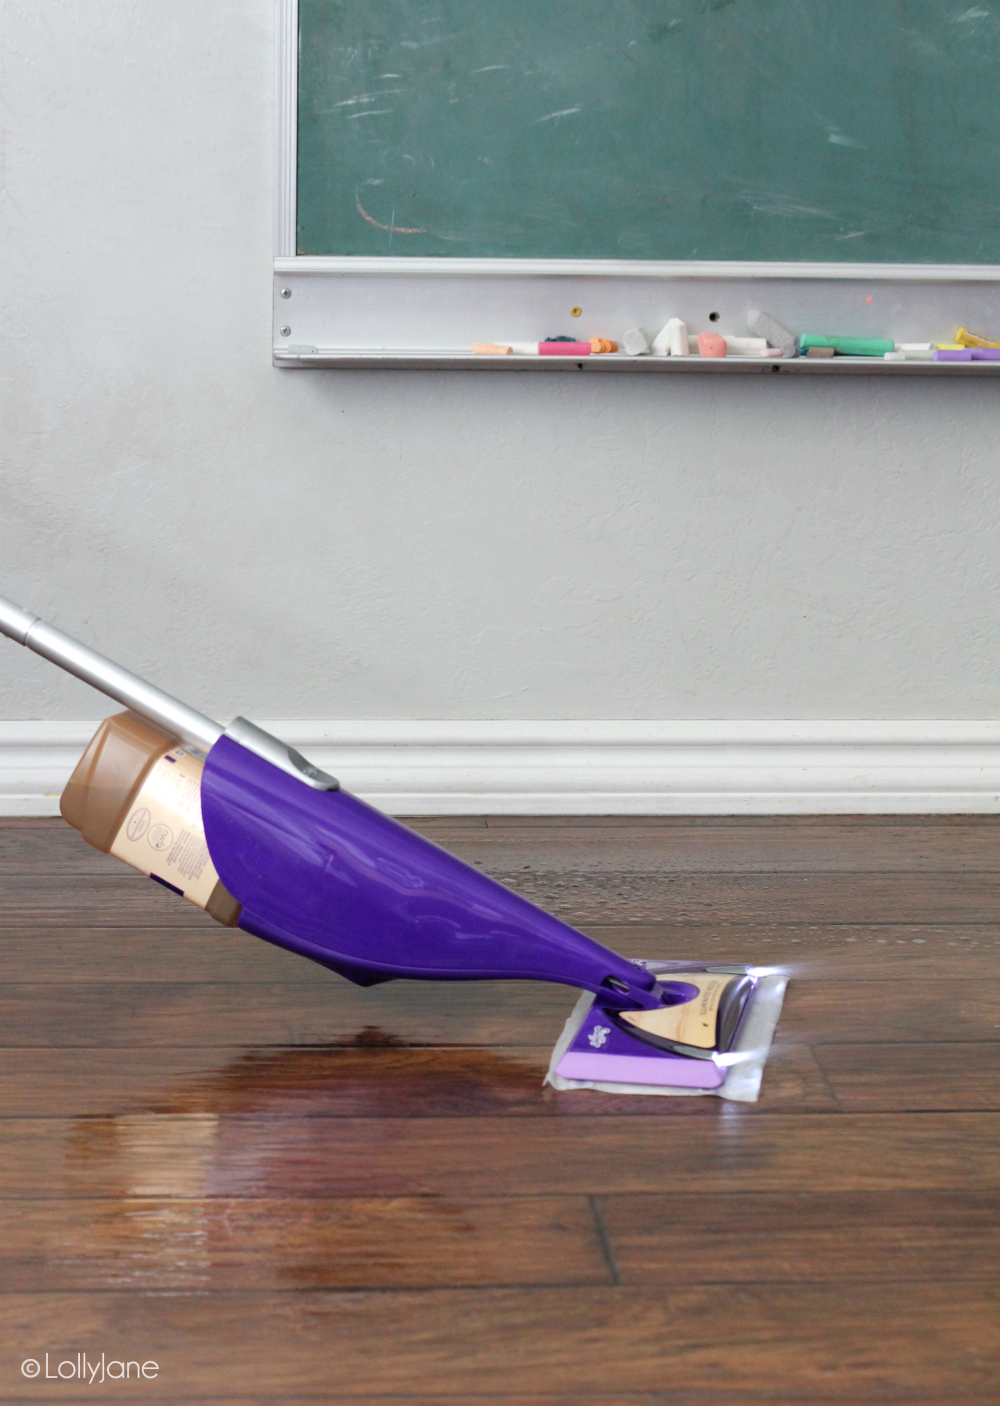 Wood Floors Clean With Our Not So Dirty, Can I Use My Swiffer Wetjet On Hardwood Floors